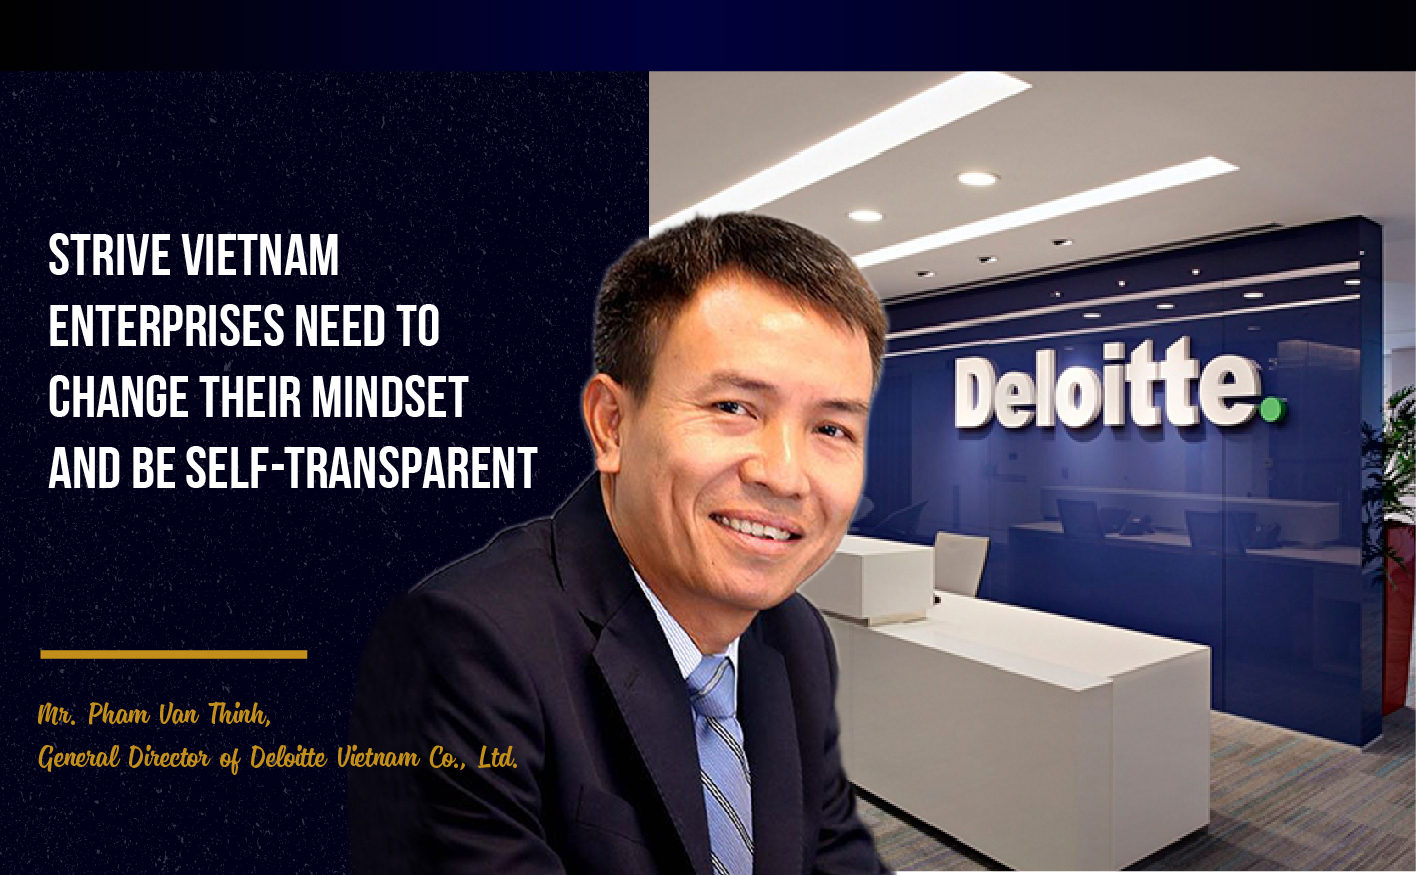 STRIVE VIETNAM ENTERPRISES NEED TO CHANGE THEIR MINDSET AND BE SELF-TRANSPARENT